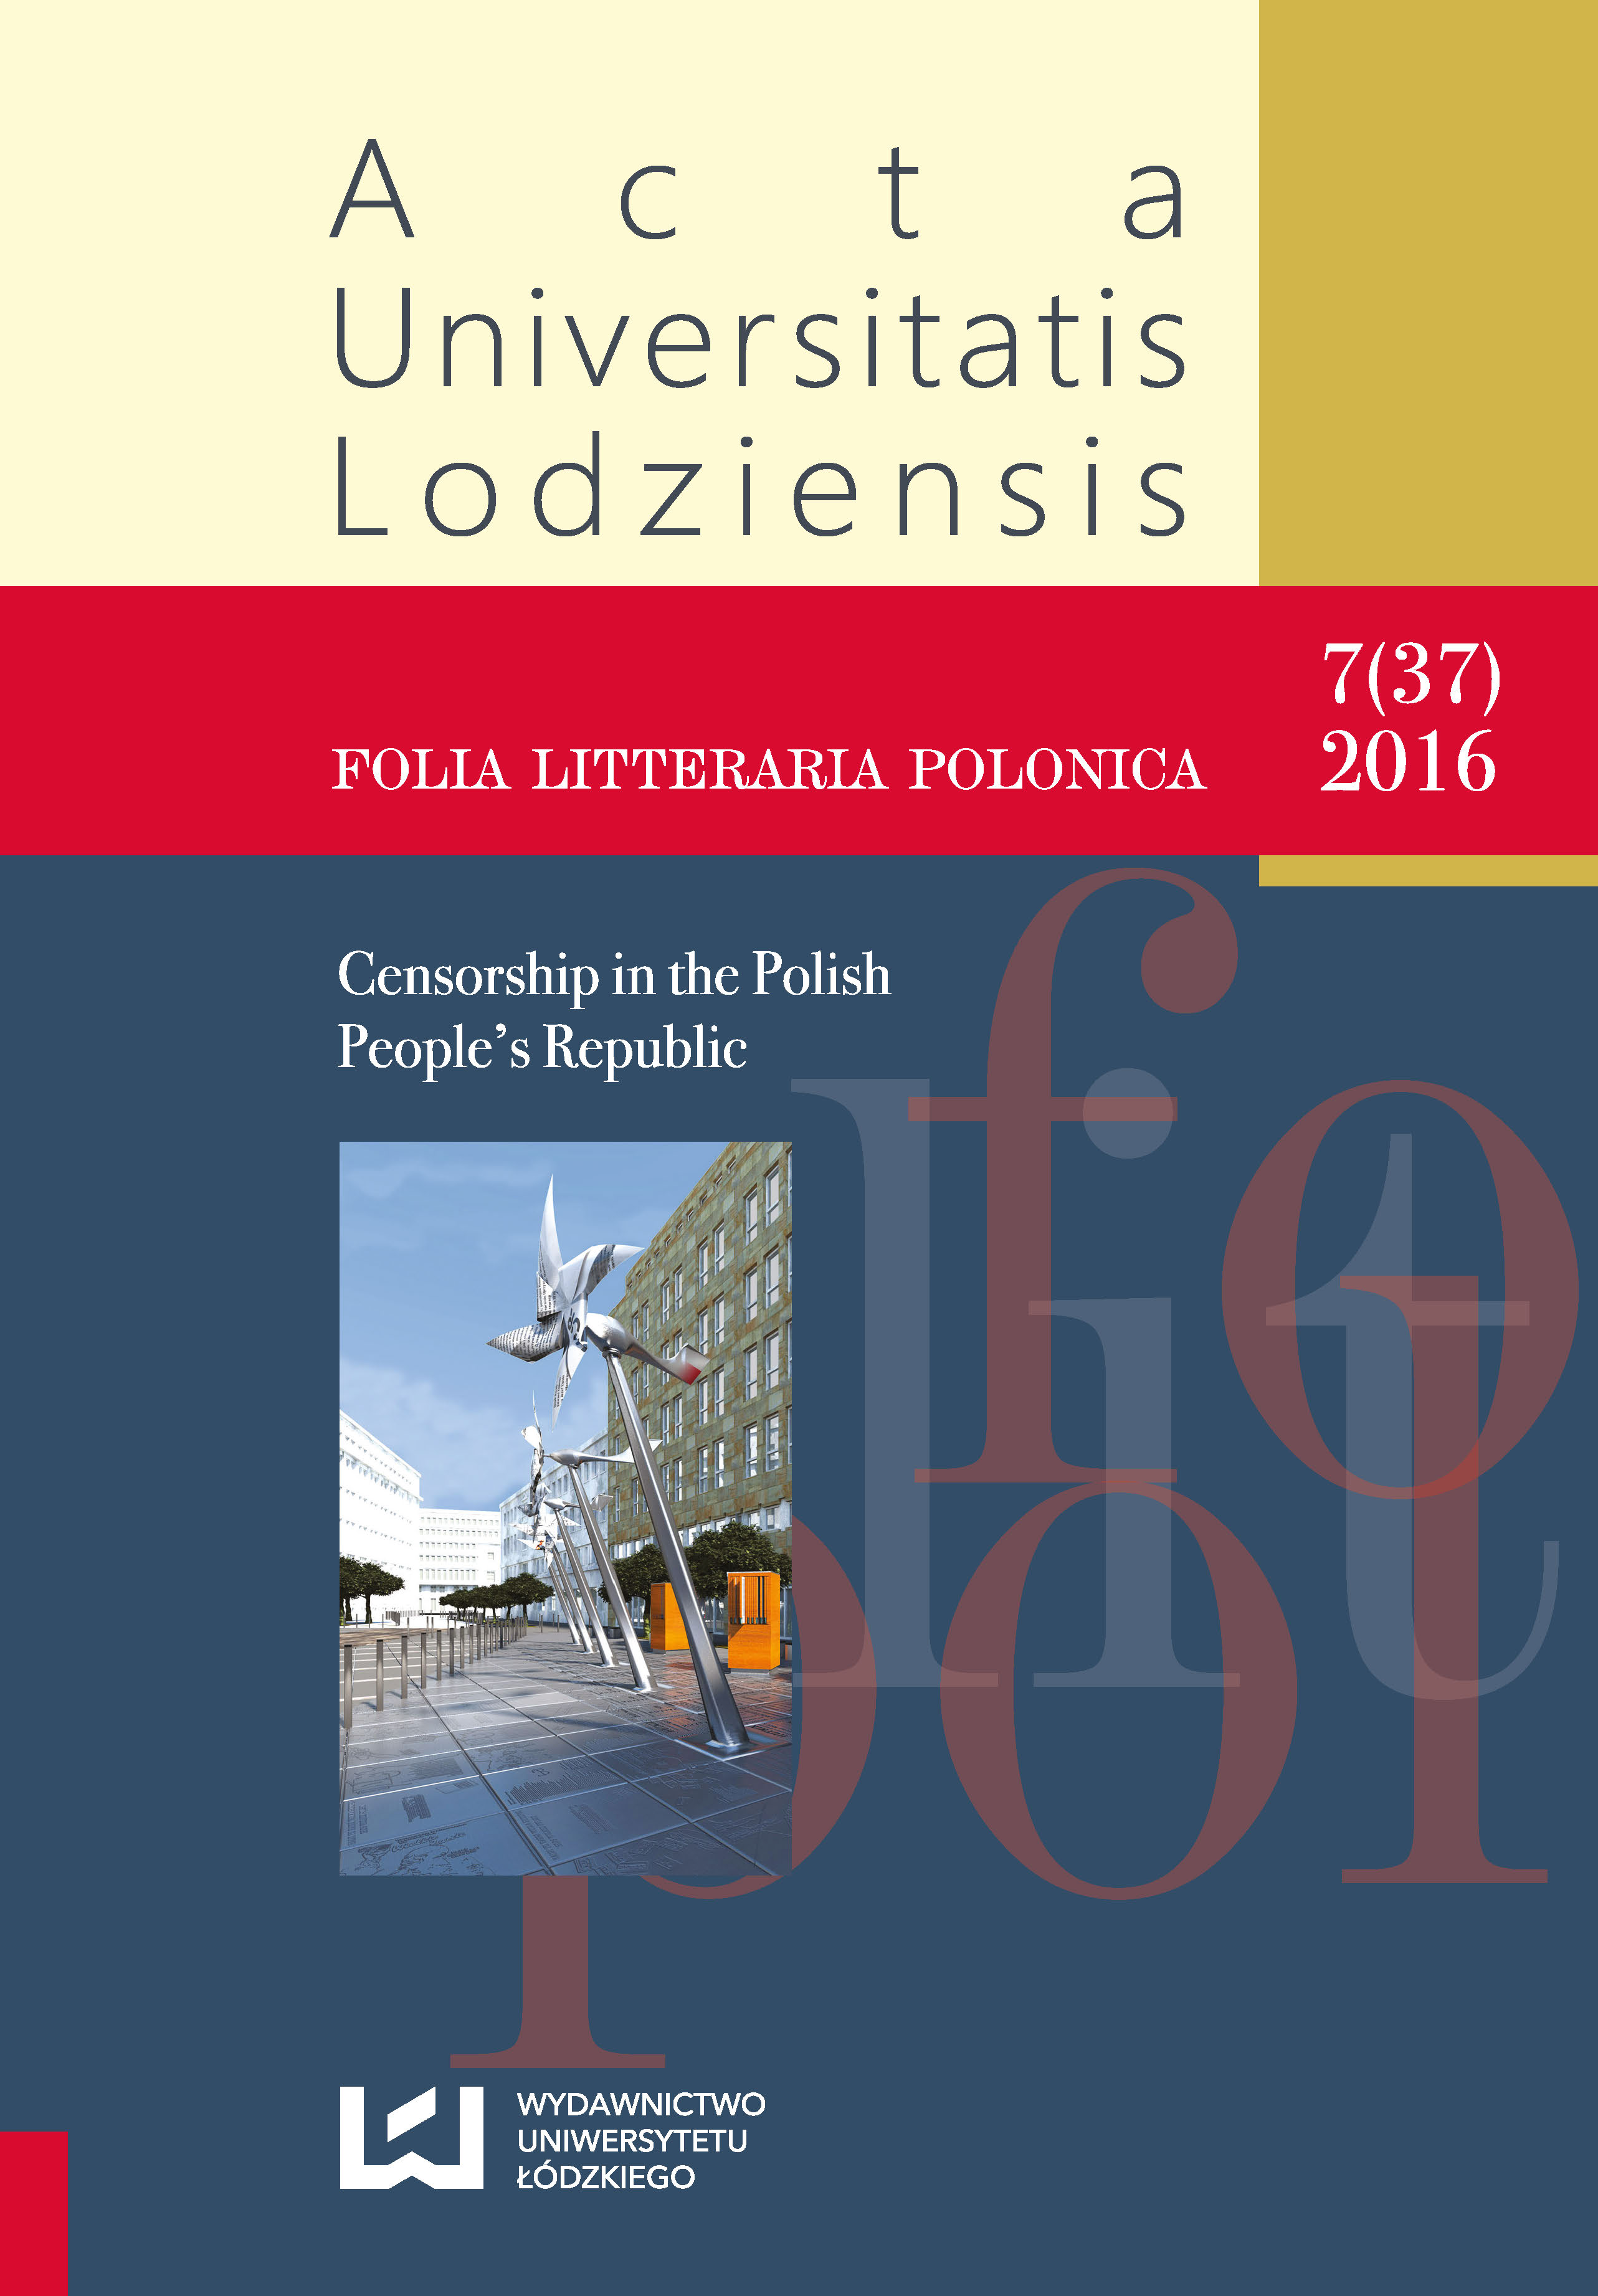 Institutional Censorship in Relation to Catholic Press during the Decline of People’s Republic of Poland (1989–1990)